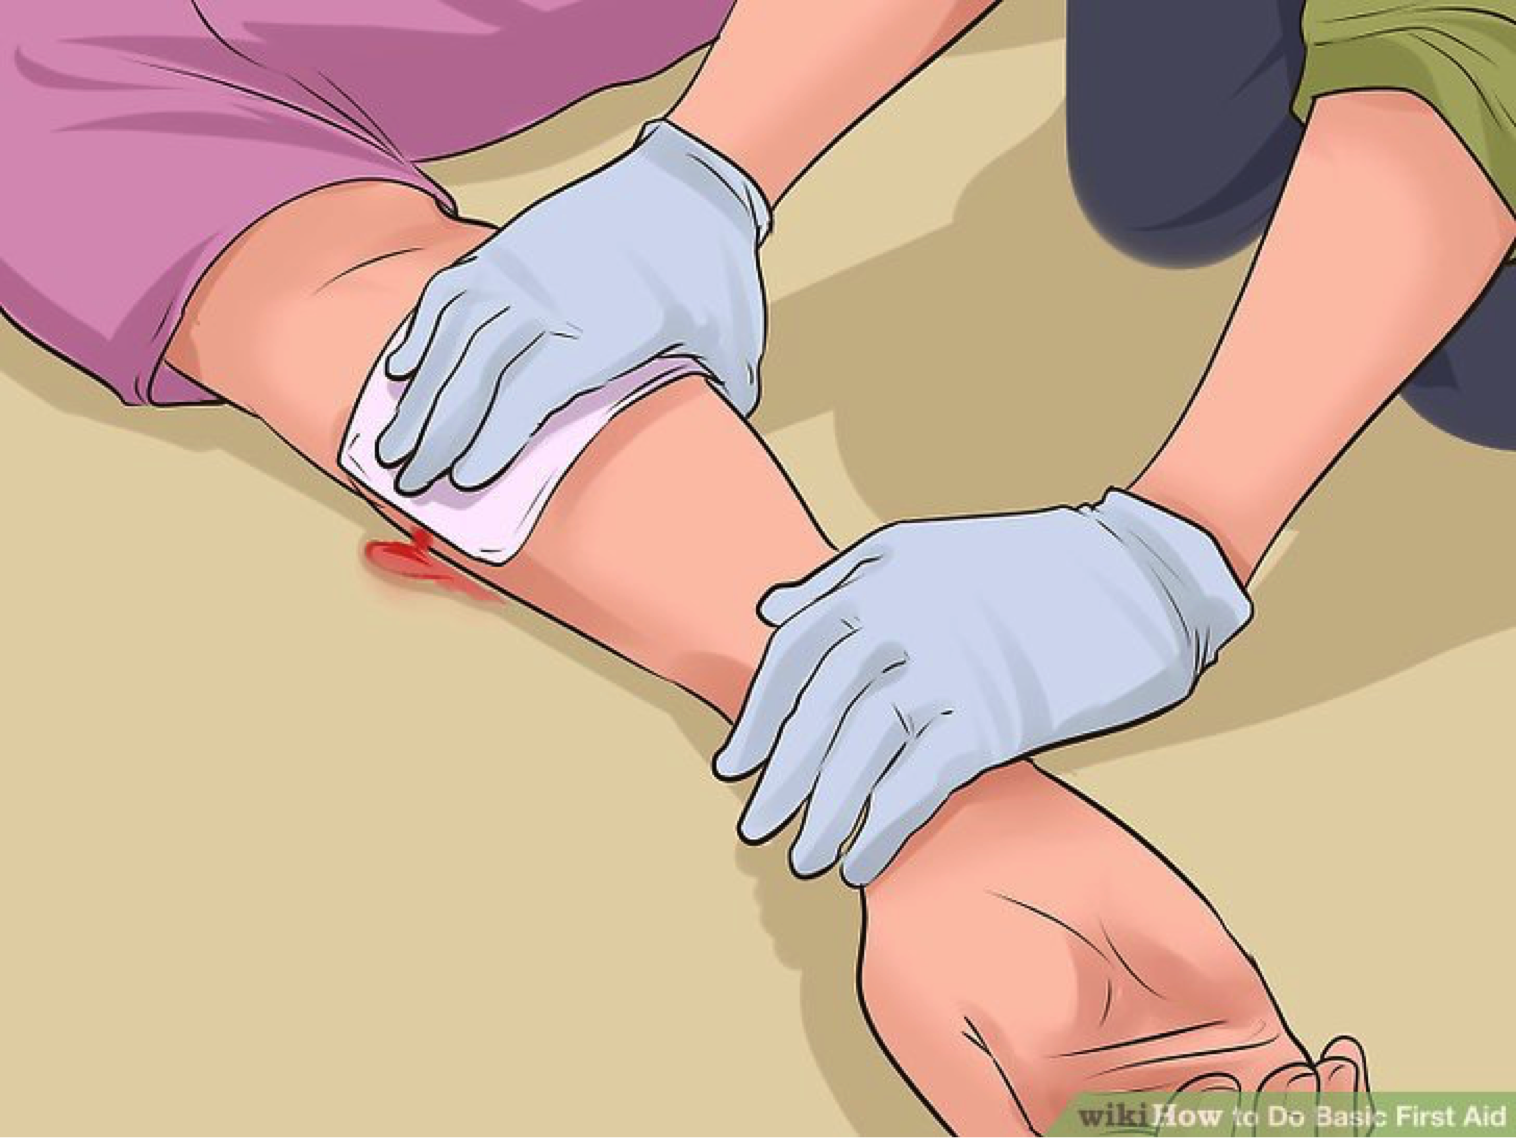 http://www.medsquirrel.co.za/Content/cmsimages/FirstAid/AAFirstAidImages/Basic%20First%20Aid/Basic-First-Aid-method3%282%29.png